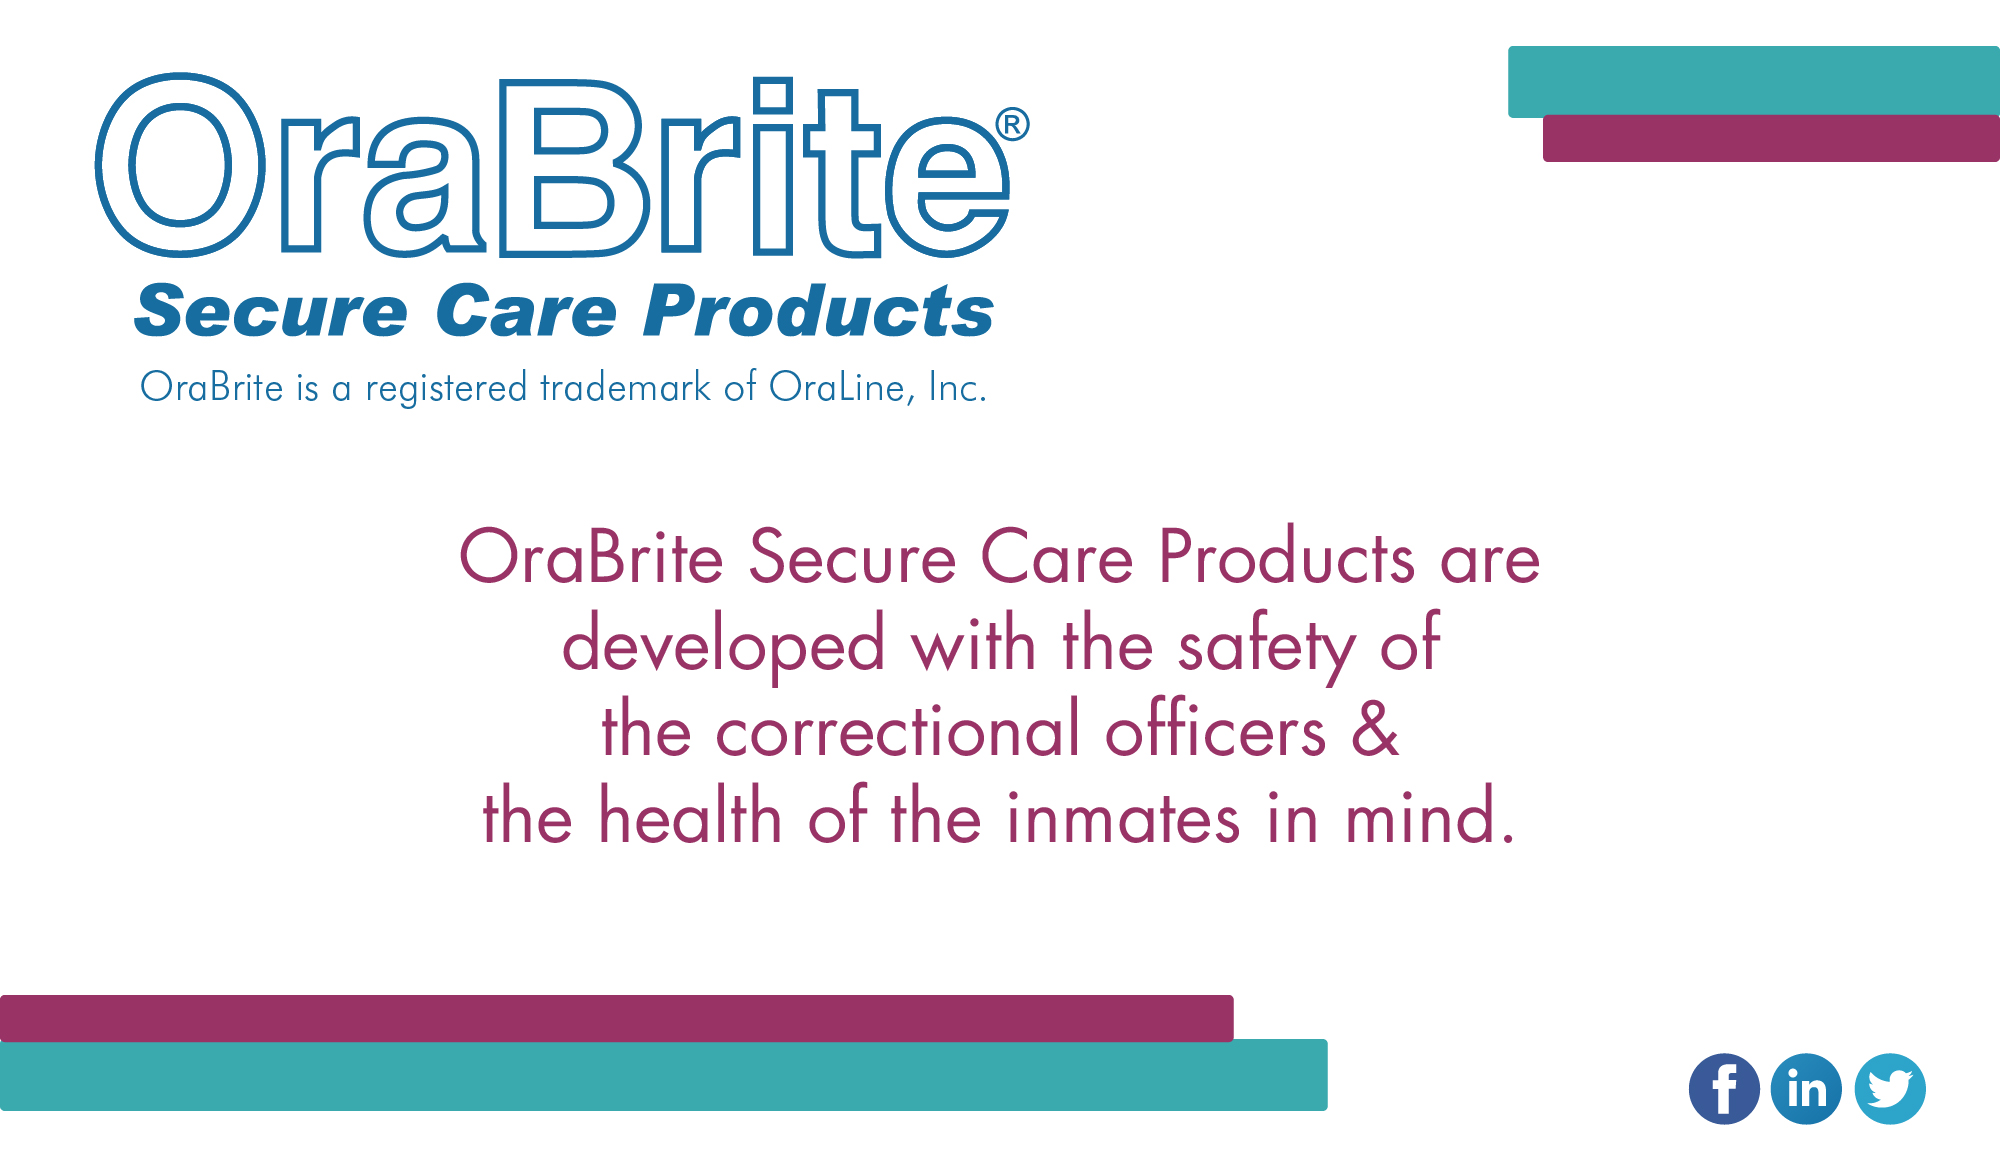 Safety of the Correctional Officers & Health of the Inmates